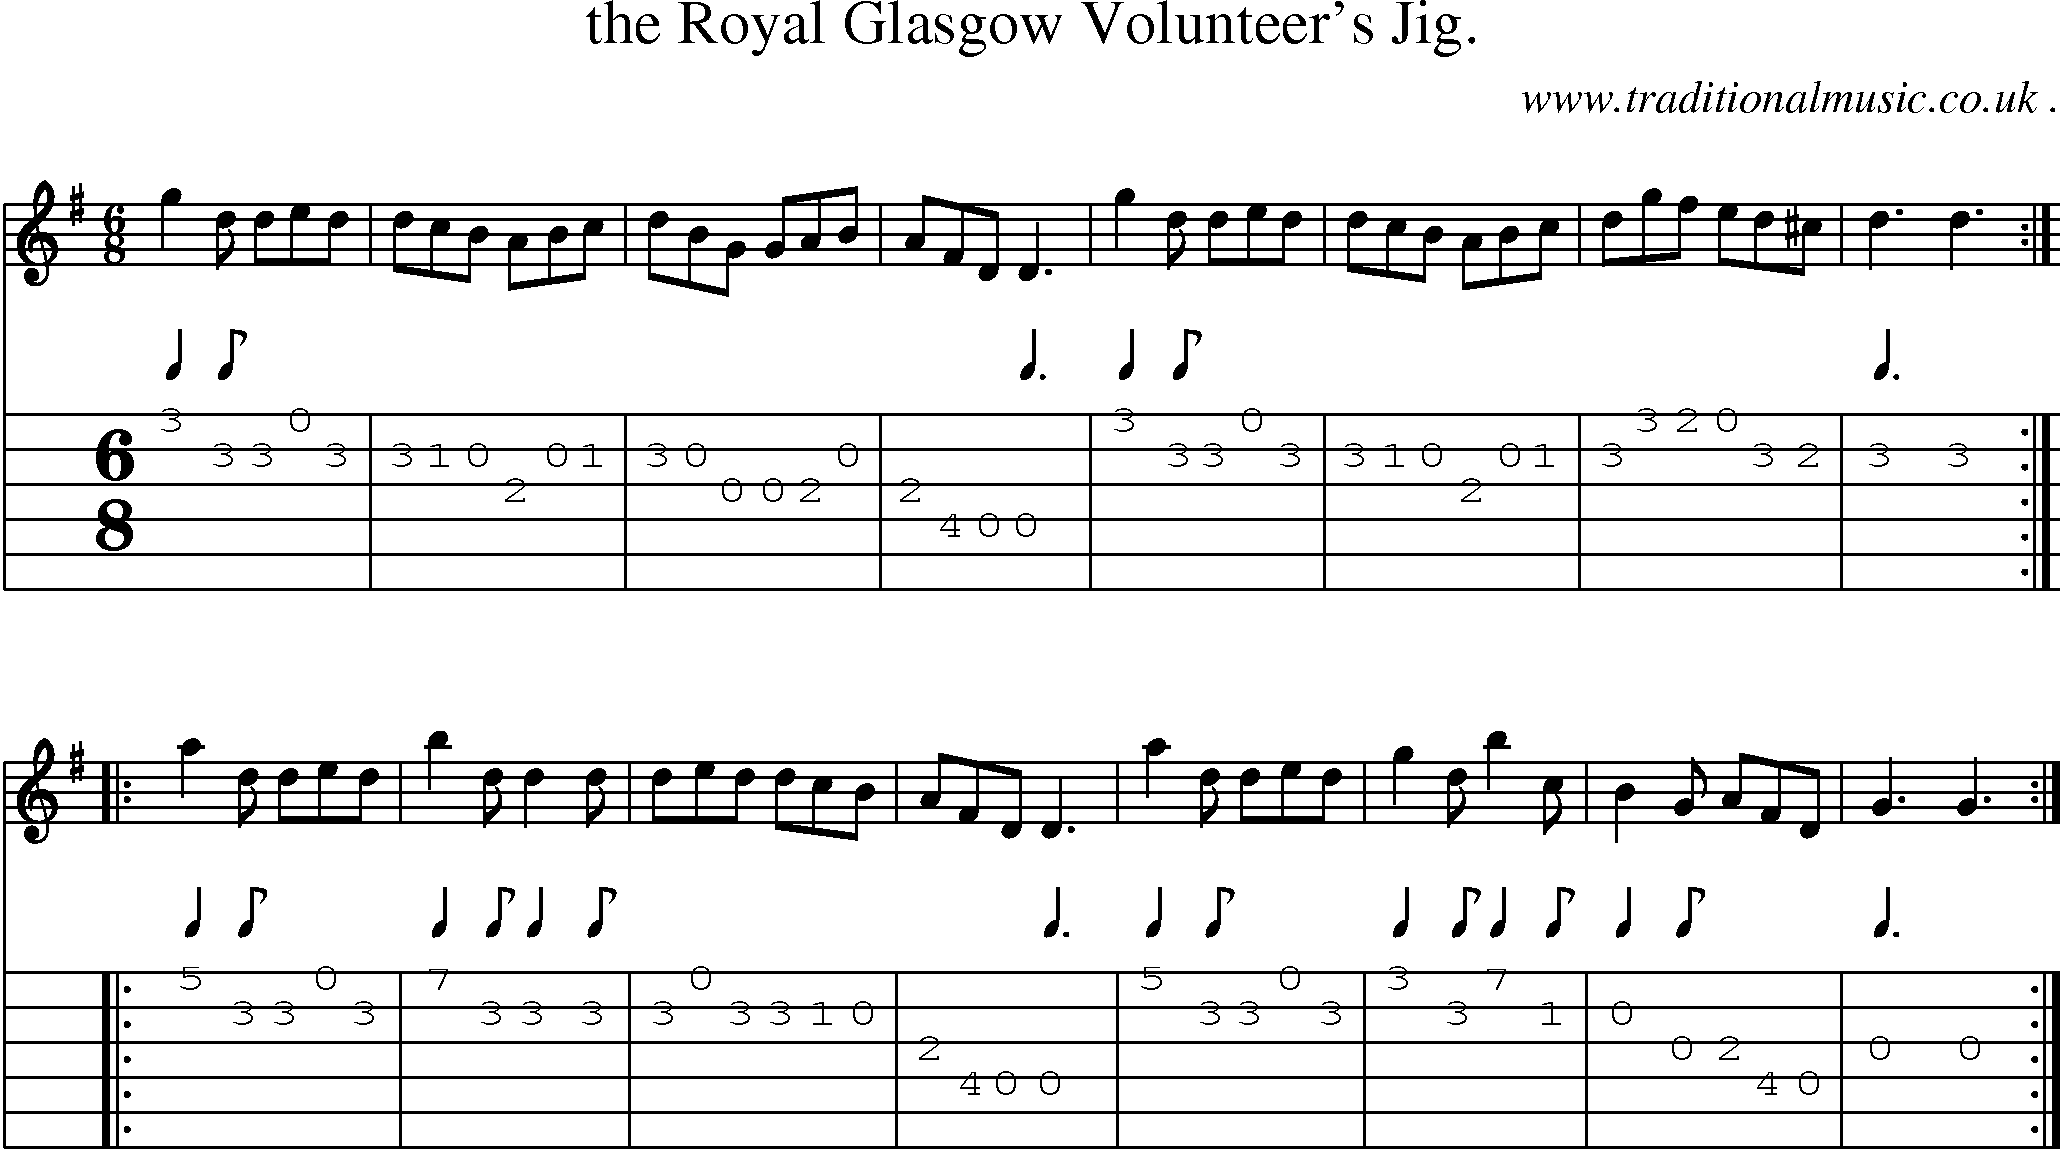 Sheet-Music and Guitar Tabs for The Royal Glasgow Volunteers Jig